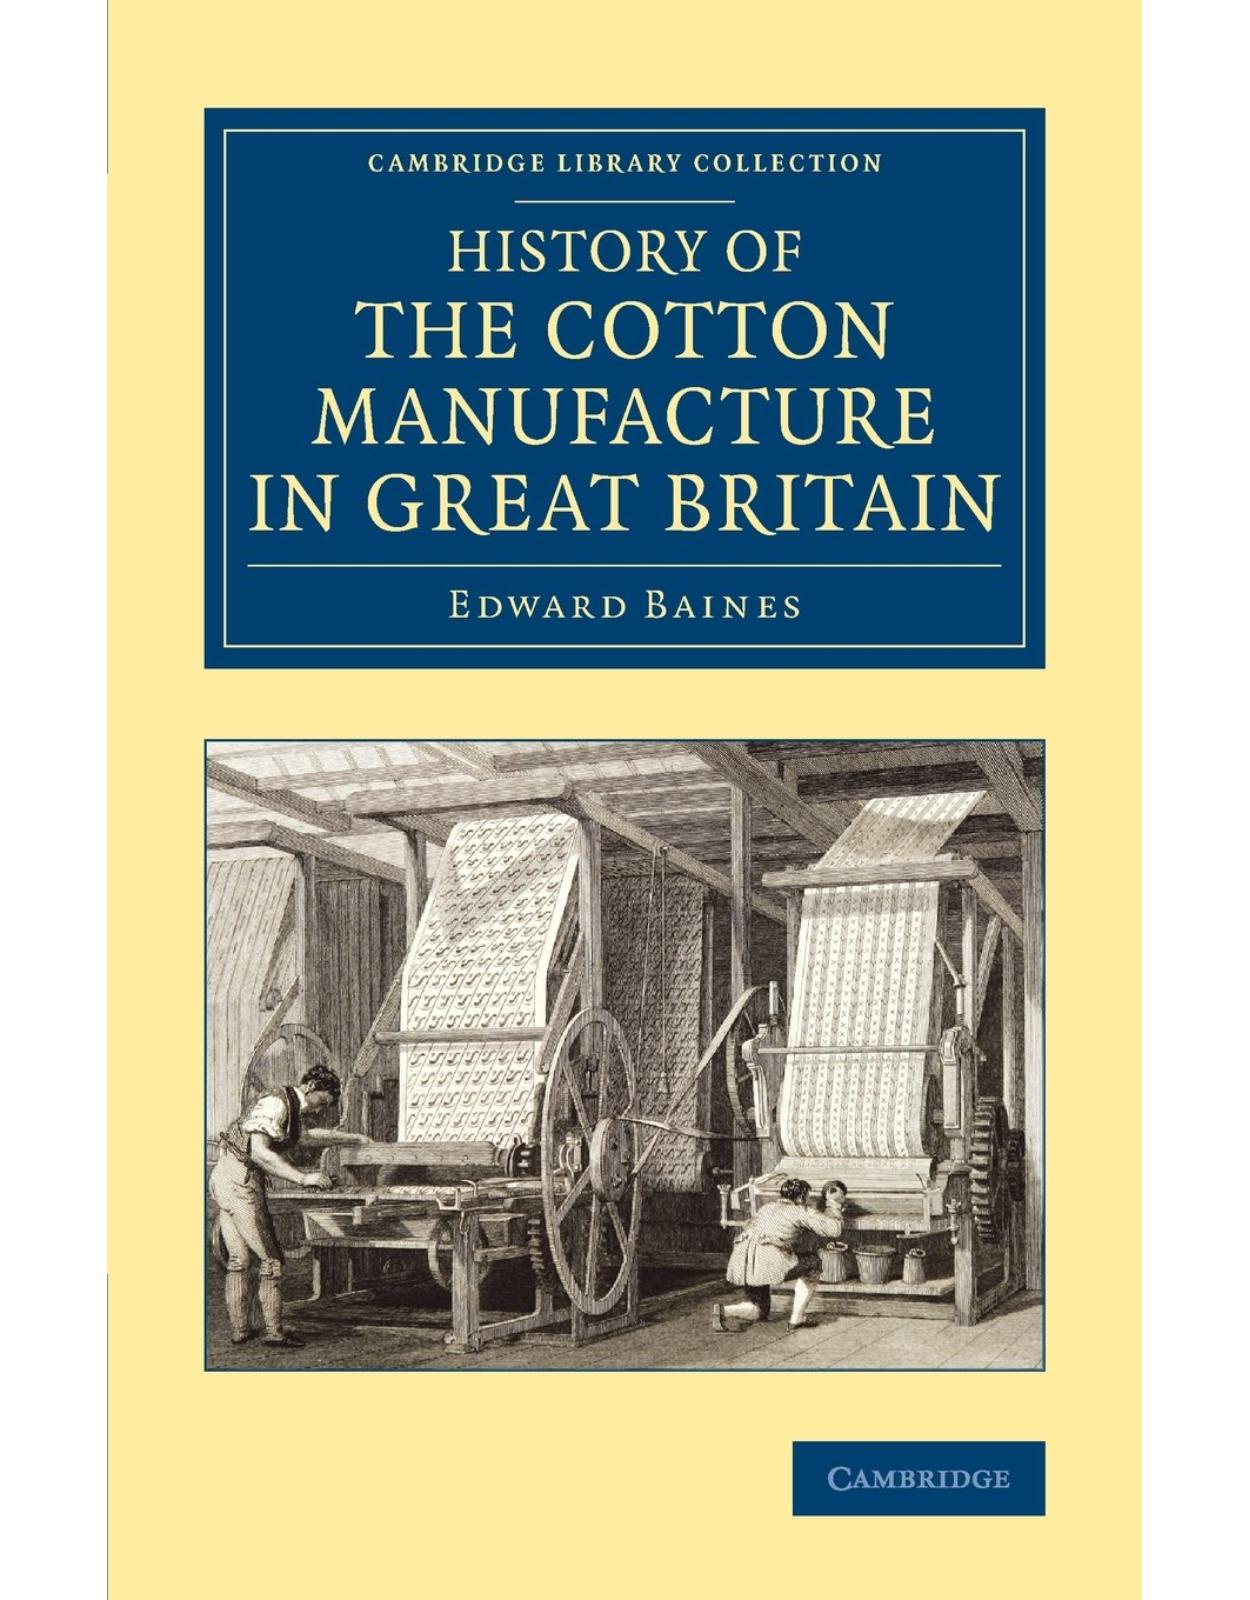 History of the Cotton Manufacture in Great Britain: With a Notice of its Early History in the East, and in All the Quarters of the Globe (Cambridge Library Collection - Technology)